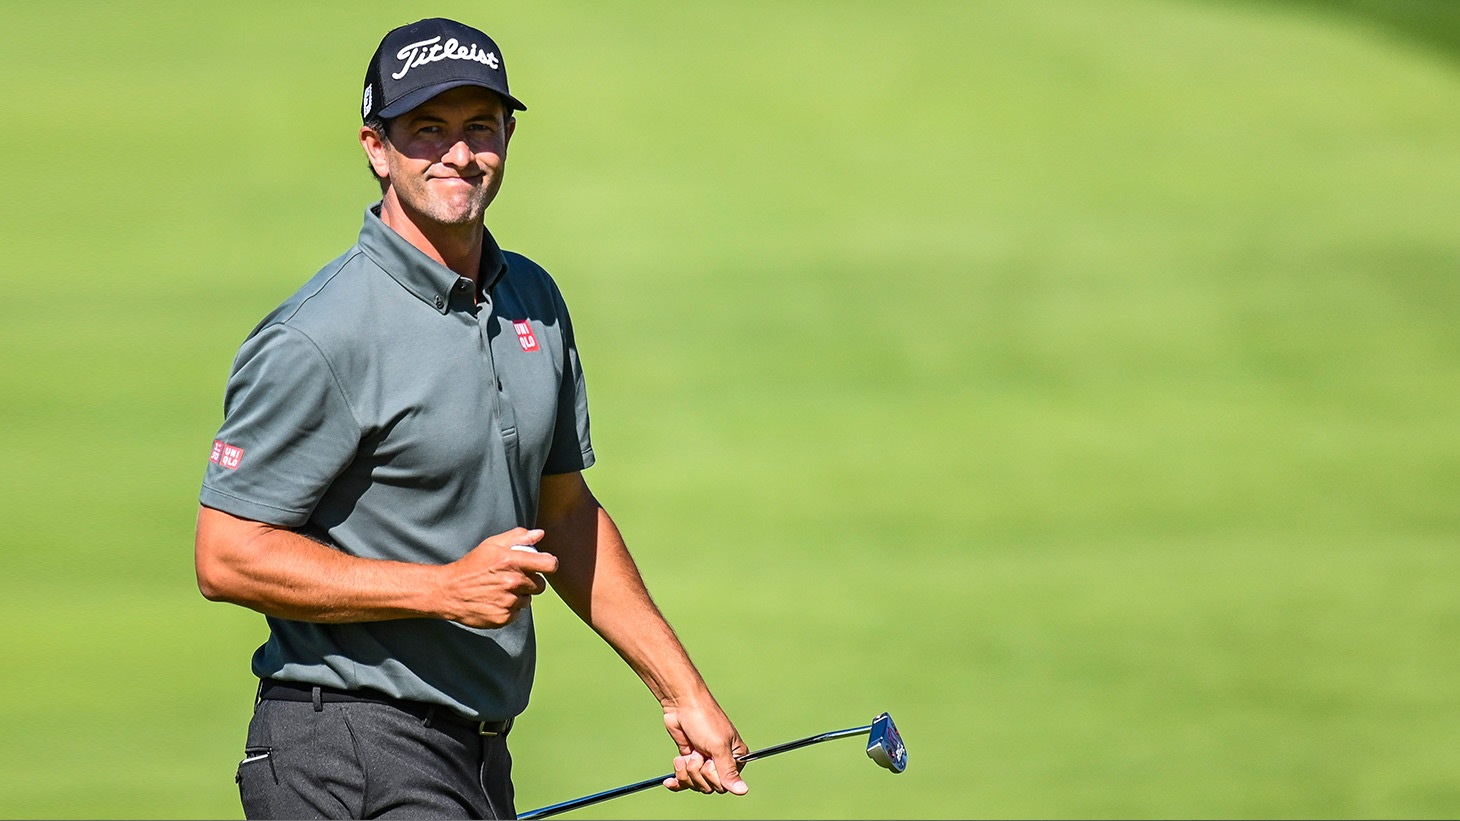 Adam Scott smiles after holing a birdie putt during action at the 2019 PLAYERS Championship